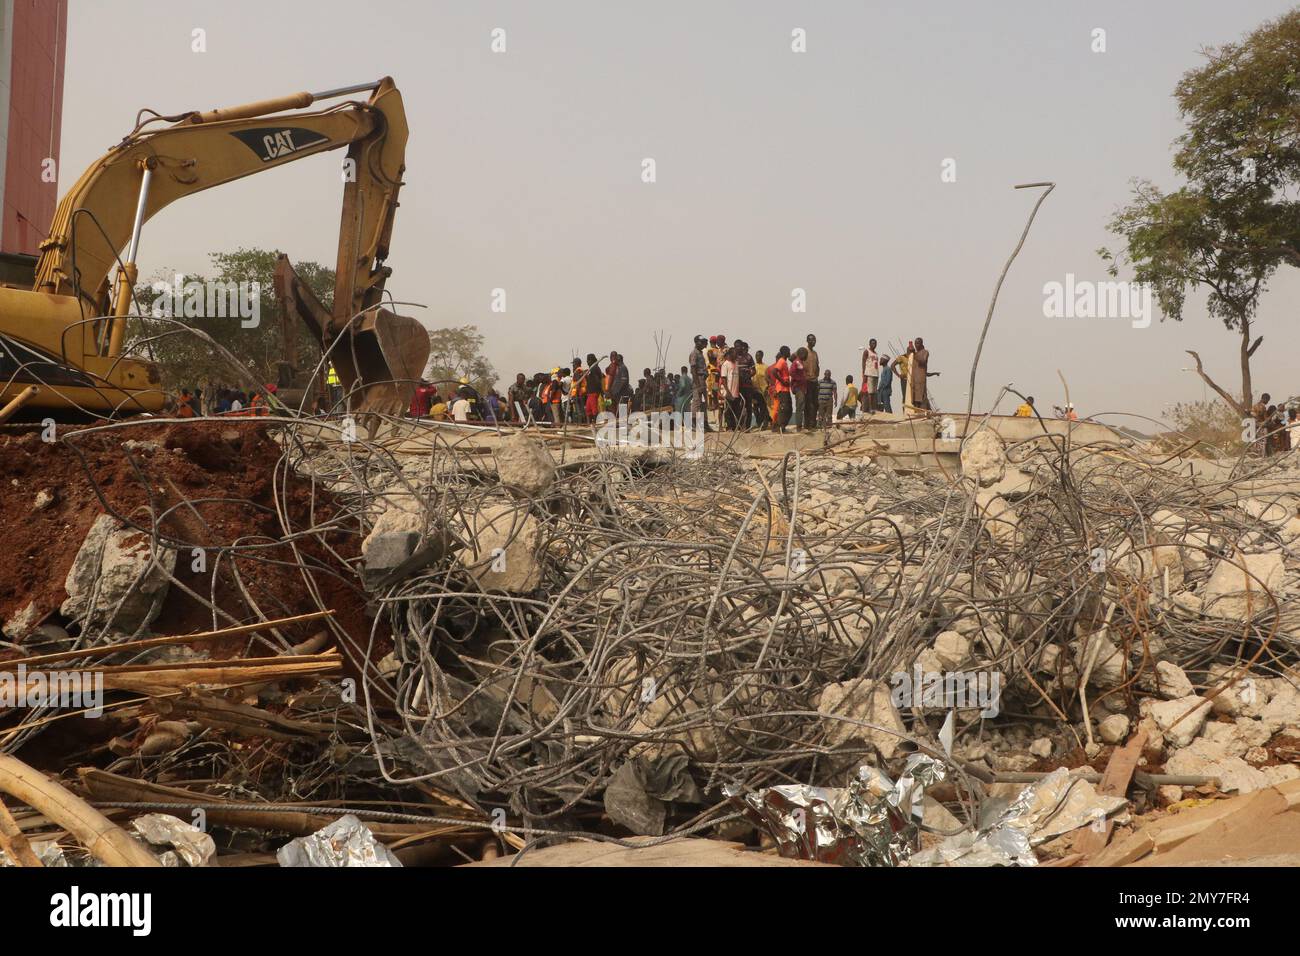 Rescue teams at the site of a 2-story building under construction that collapsed in Abuja, Nigeria’s capital city, Feb. 2, 2023. One person was confirmed dead, four persons rescued alive with serious injury and many were trapped under the rubbles after the two-story building collapsed. Nigeria. Stock Photo